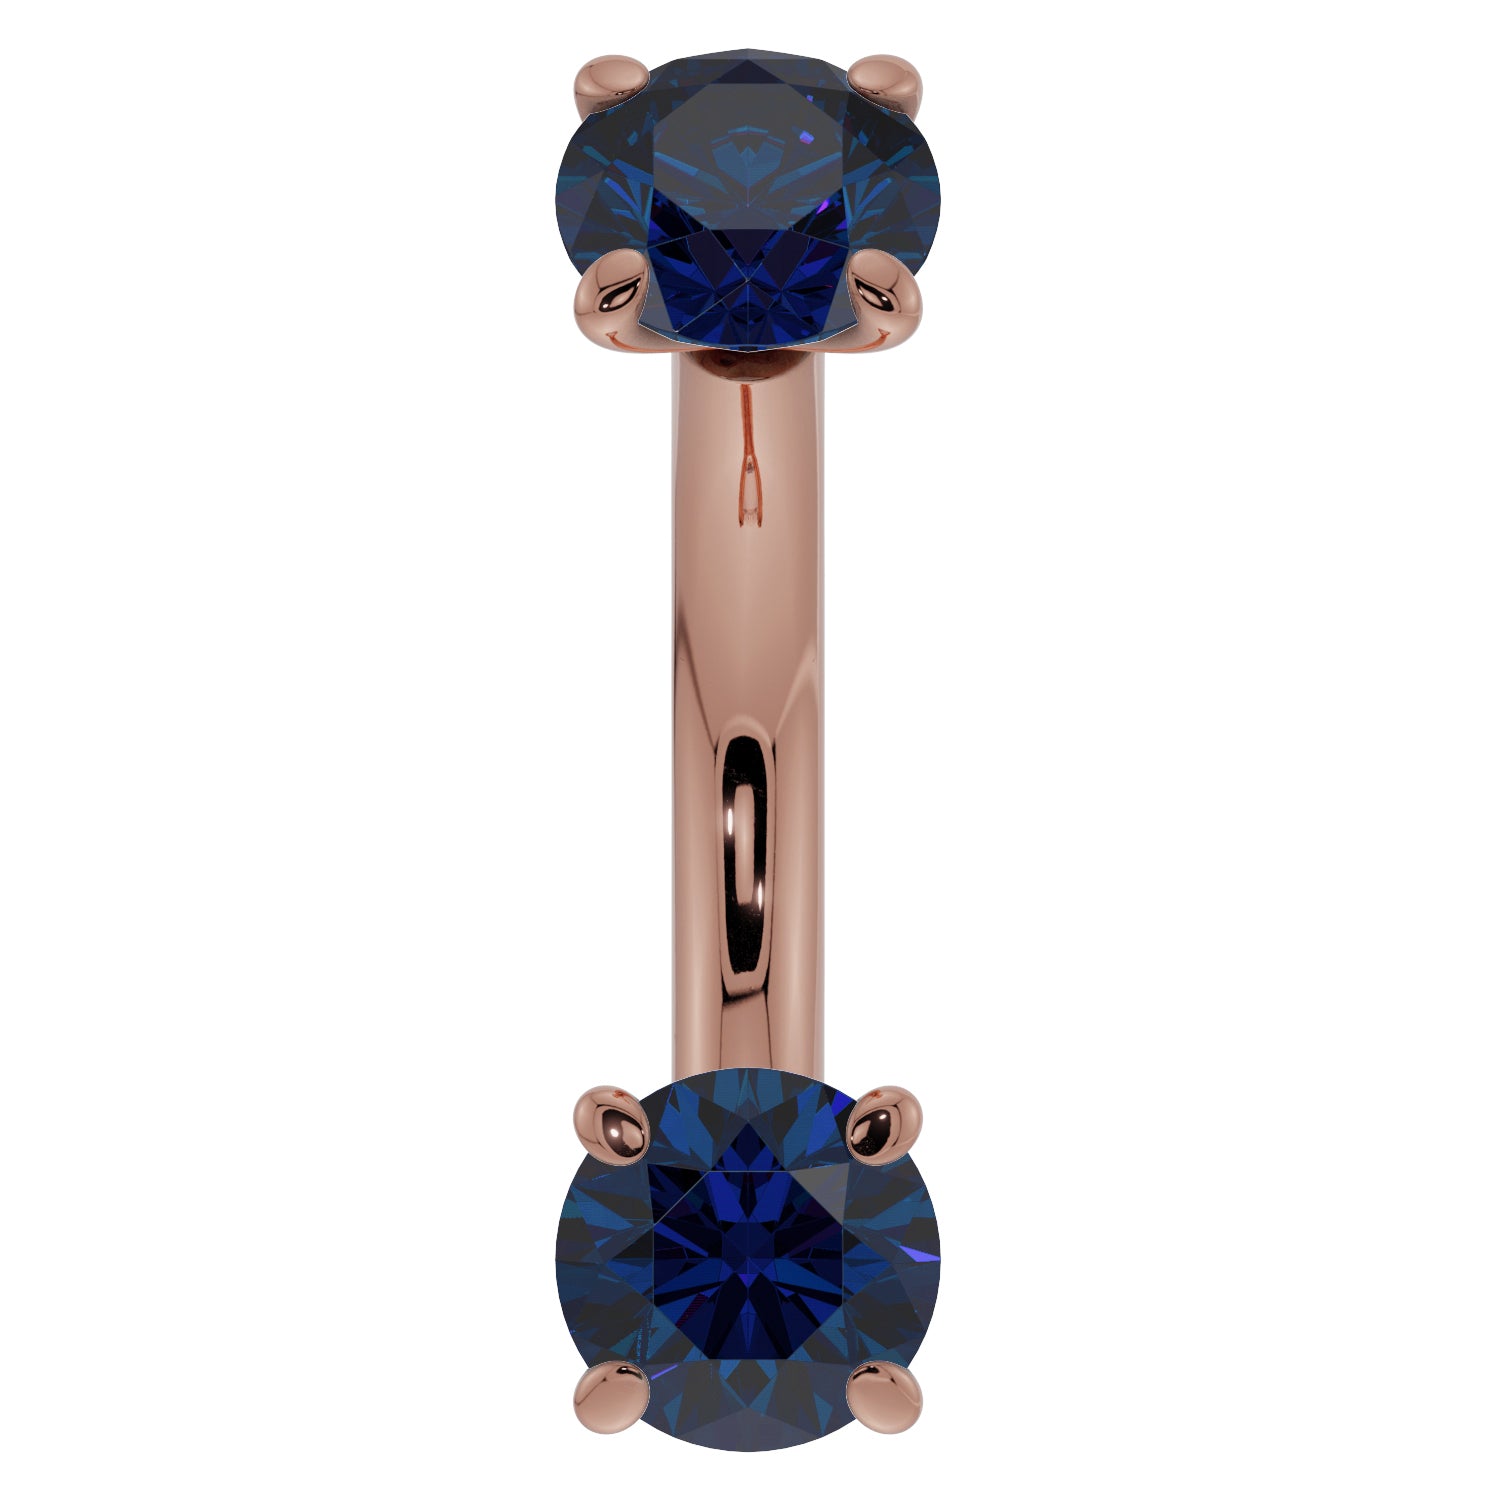 Blue Sapphire Prong-Set Eyebrow Rook Belly Curved Barbell-14K Rose Gold   14G (1.6mm) (Belly Ring)   7 16